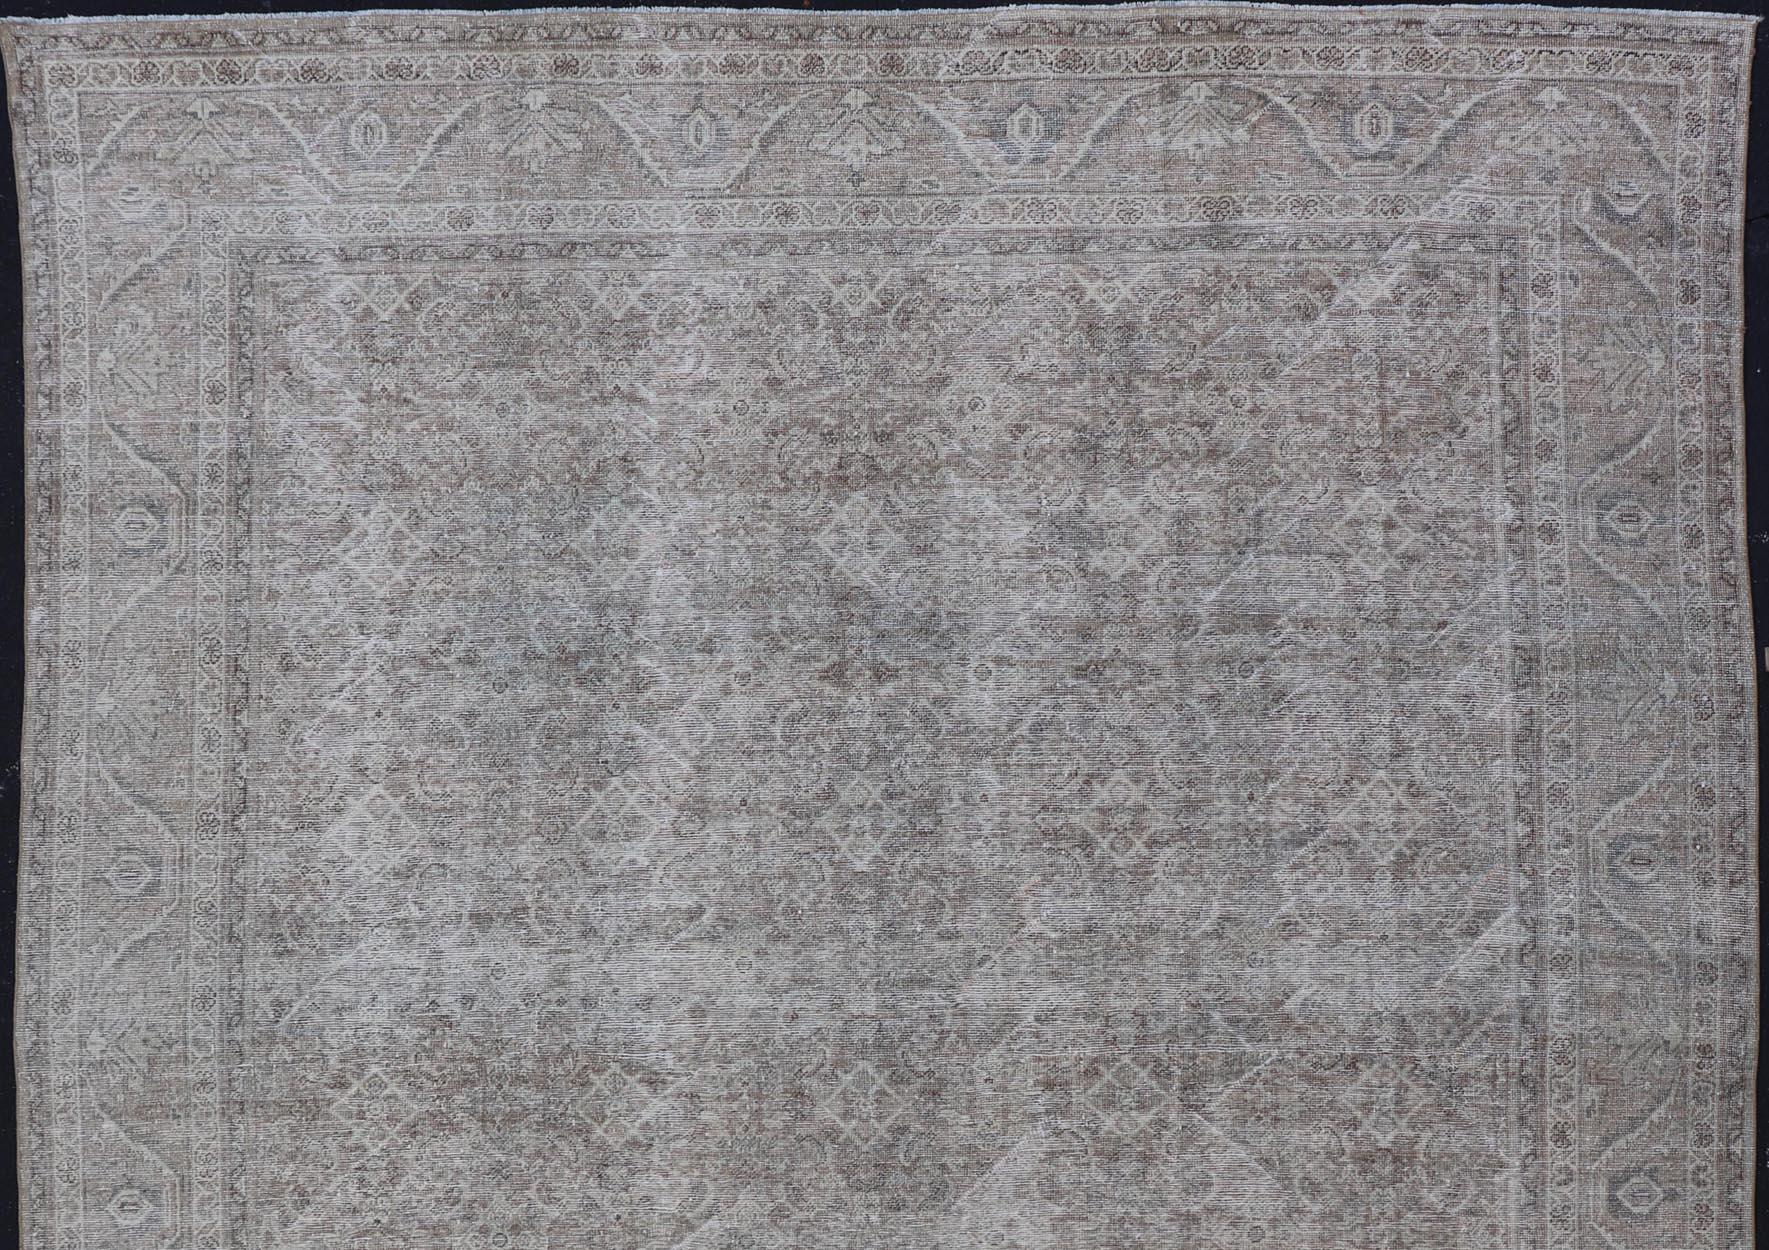 Hand-Knotted Antique Persian Distressed Mahal Rug in Warm Earthy Tones with All-Over Design